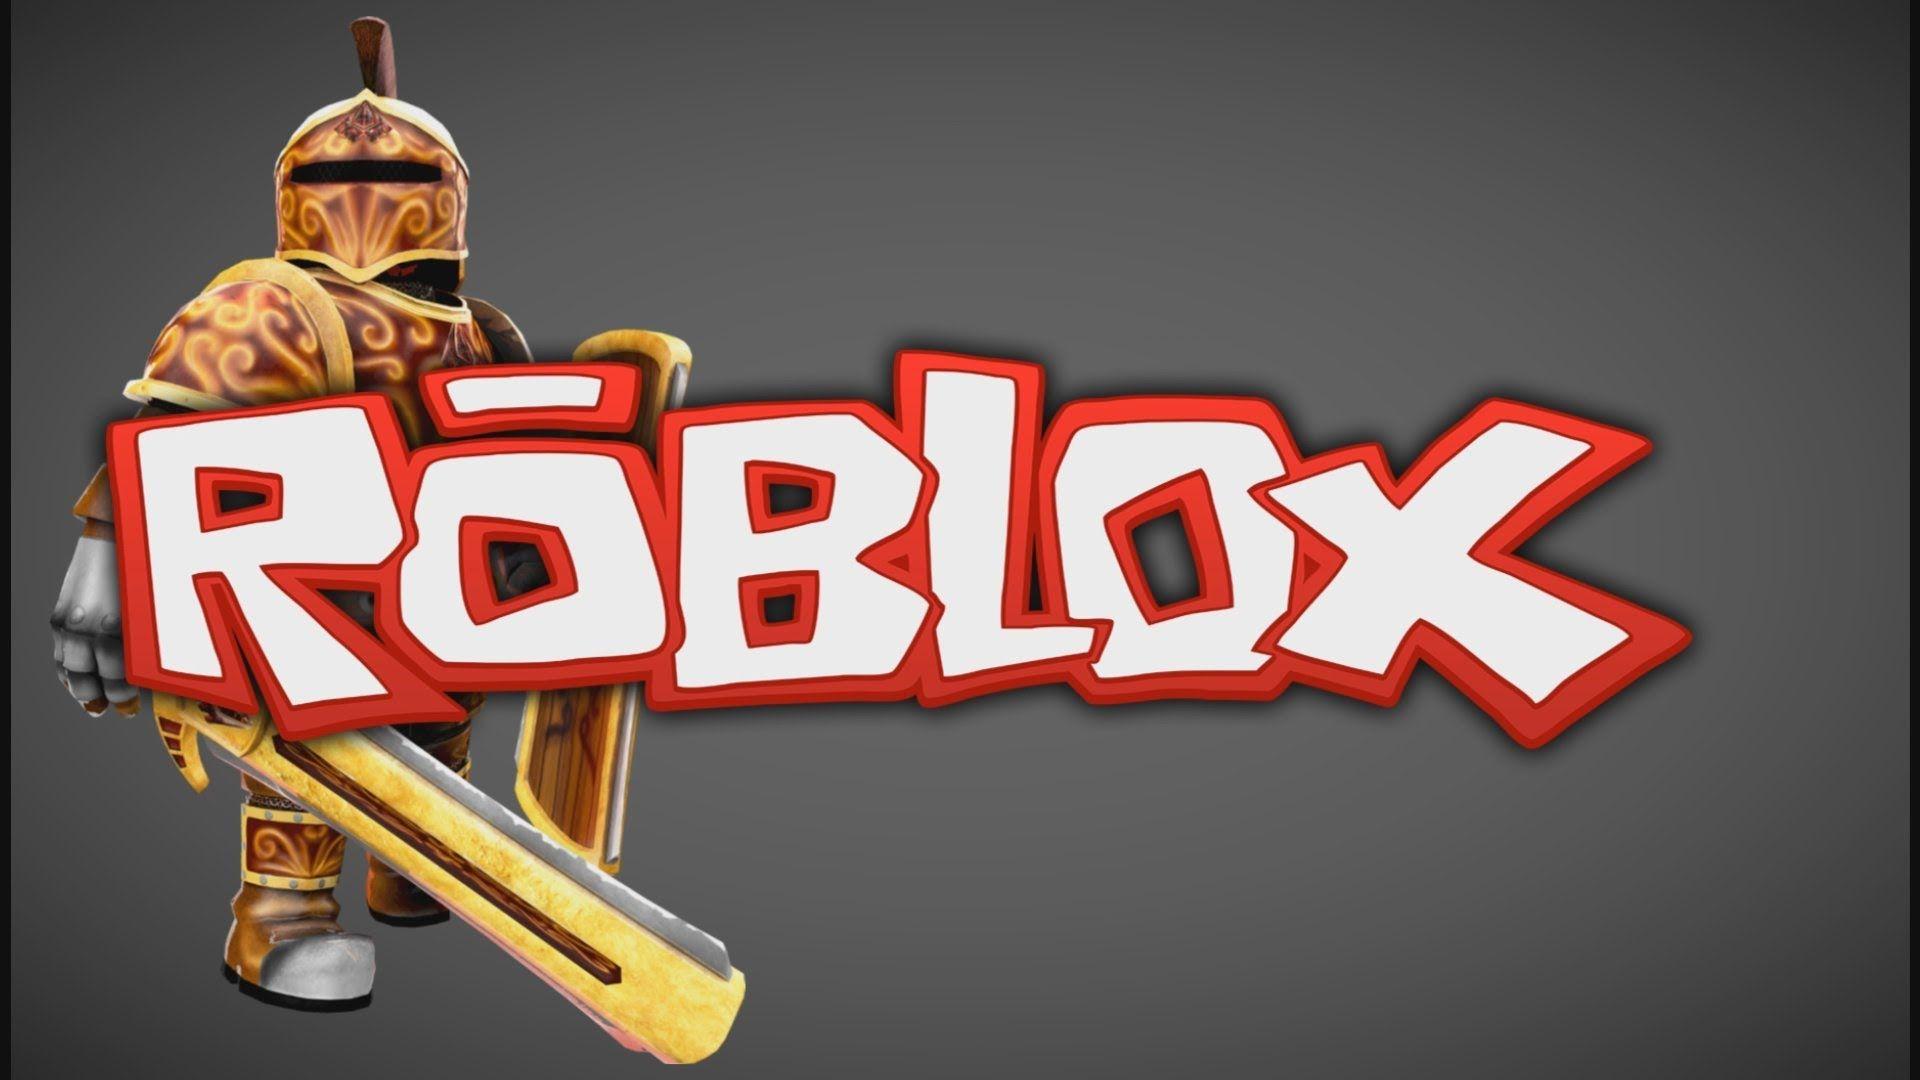 Roblox Pc Wallpapers Top Free Roblox Pc Backgrounds Wallpaperaccess - 2048 x 1152 pixels and 6mb or less roblox